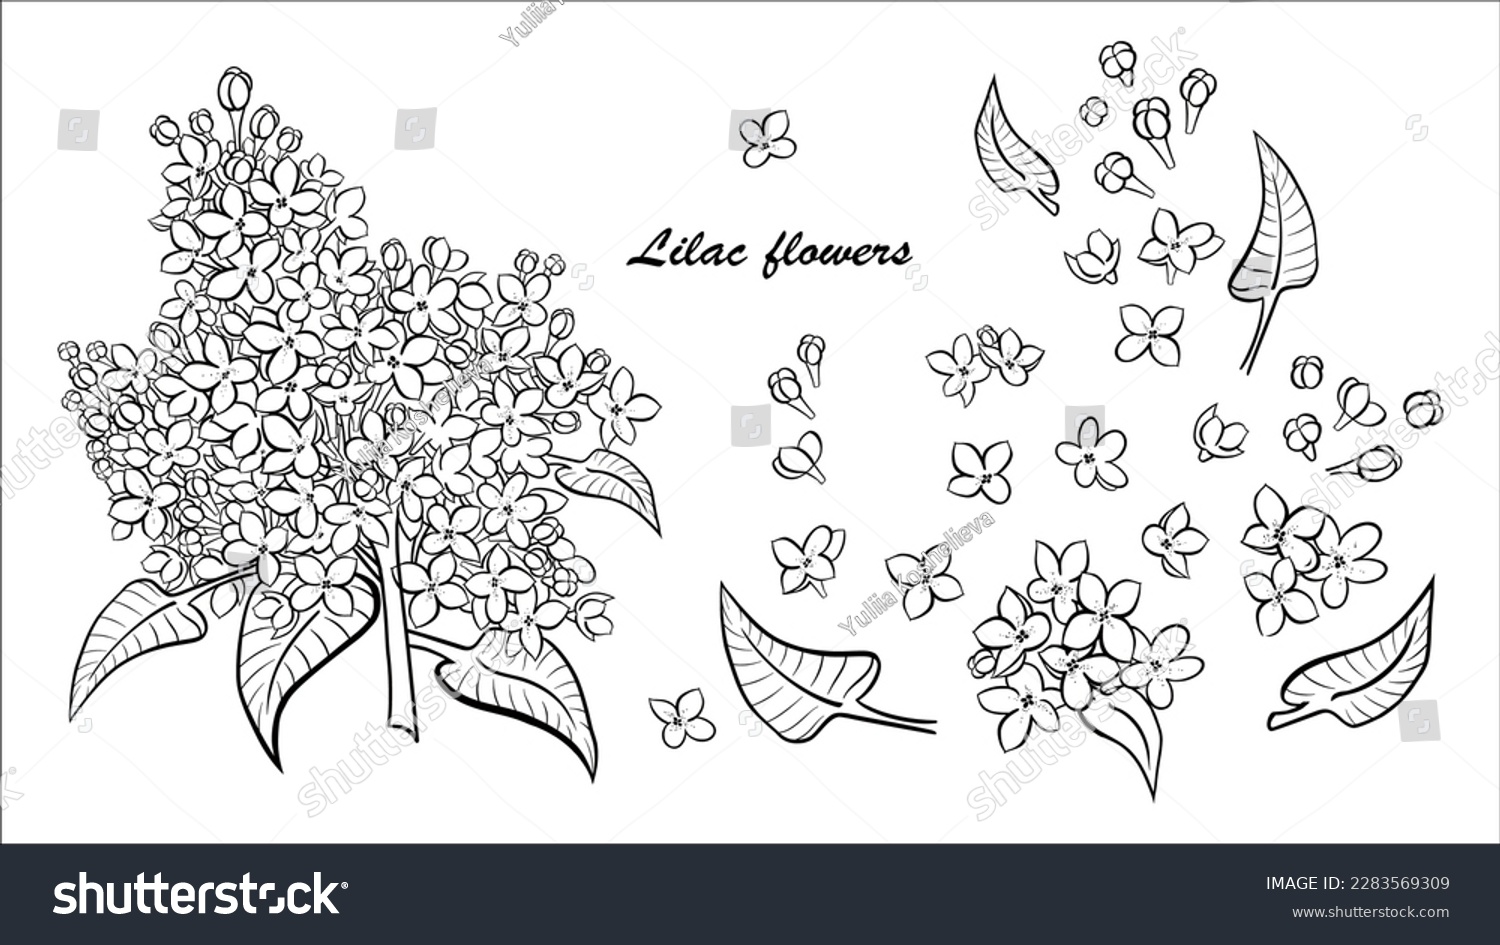 SVG of Set of illustrations of lilac flowers elements hand drawn svg